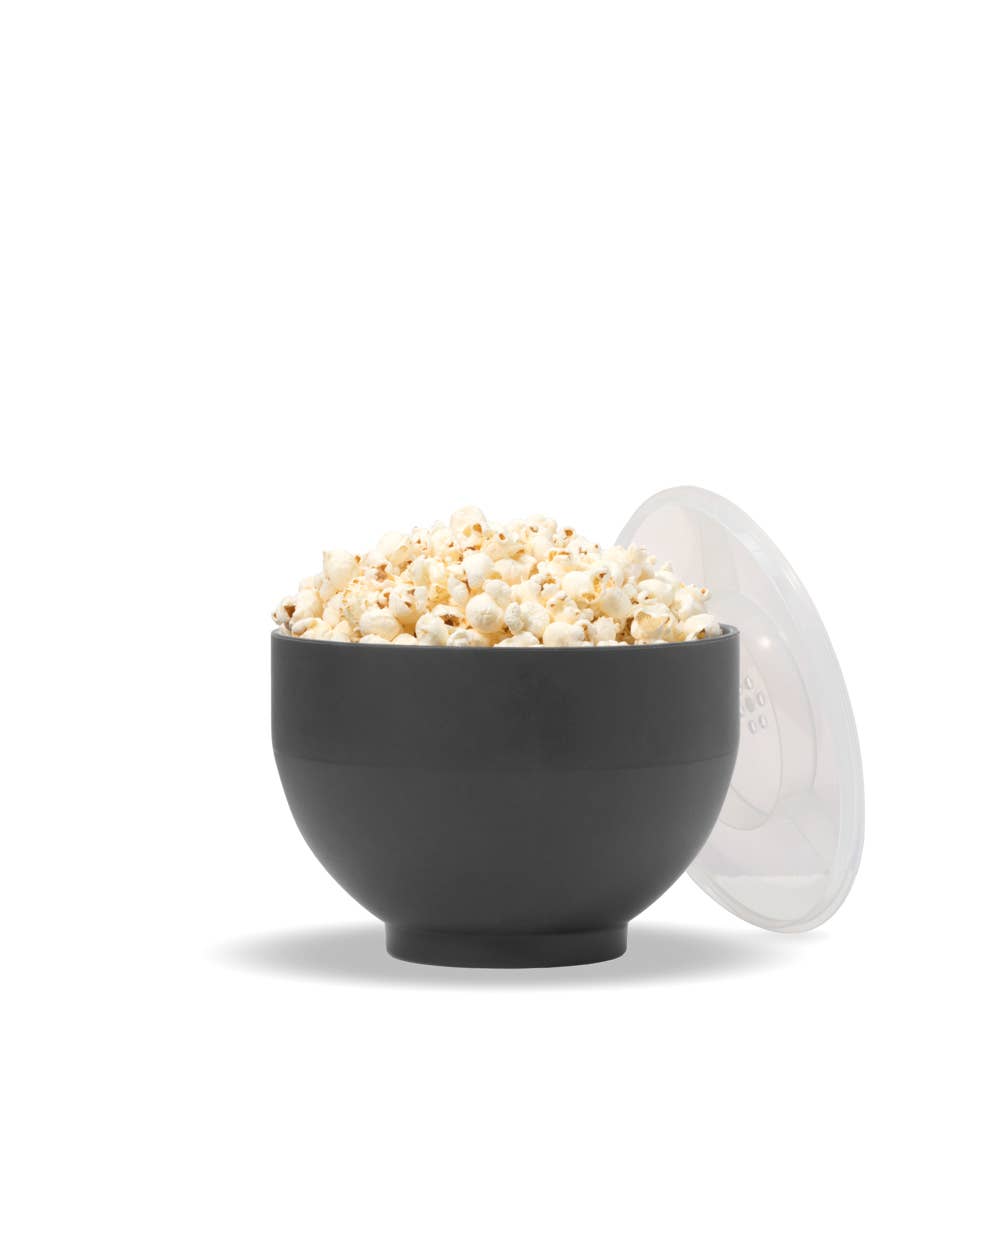 Popcorn Popper Silicone Reusable Maker - Standard Size: Red